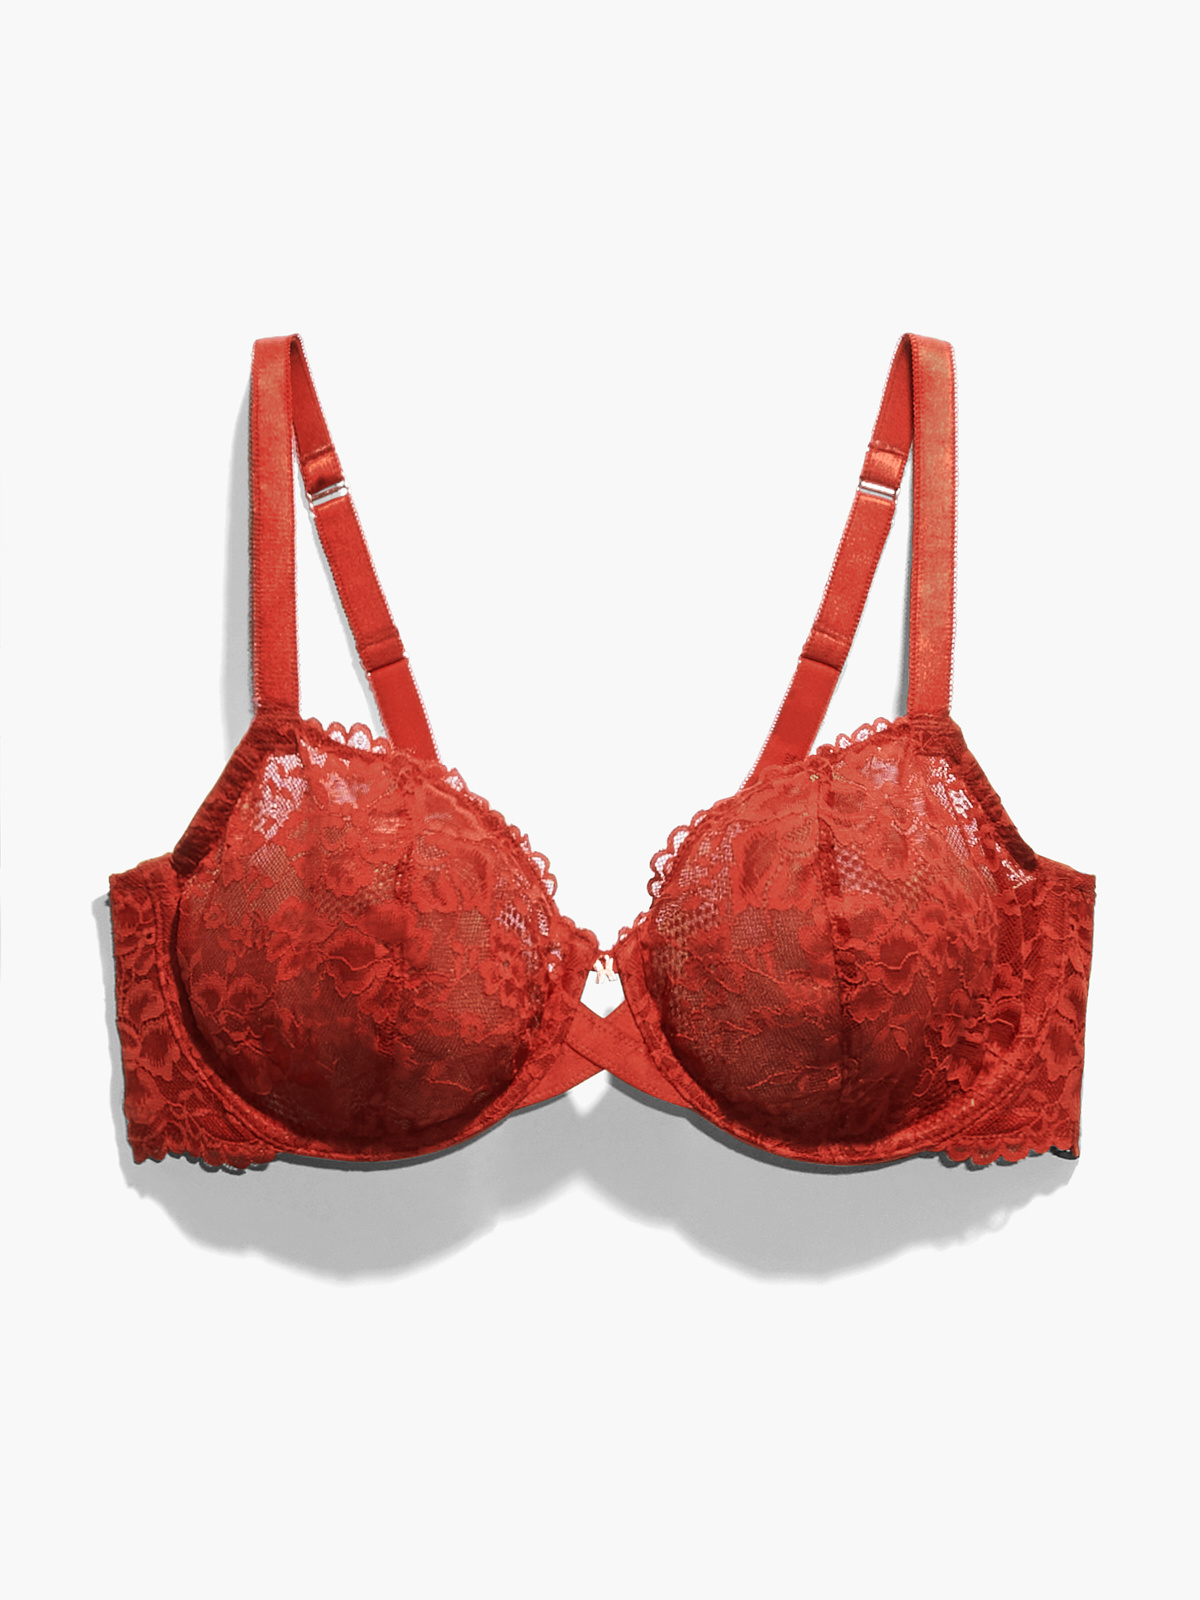 Red Bra With Black Lace Flower Pattern Art Board Print for Sale by